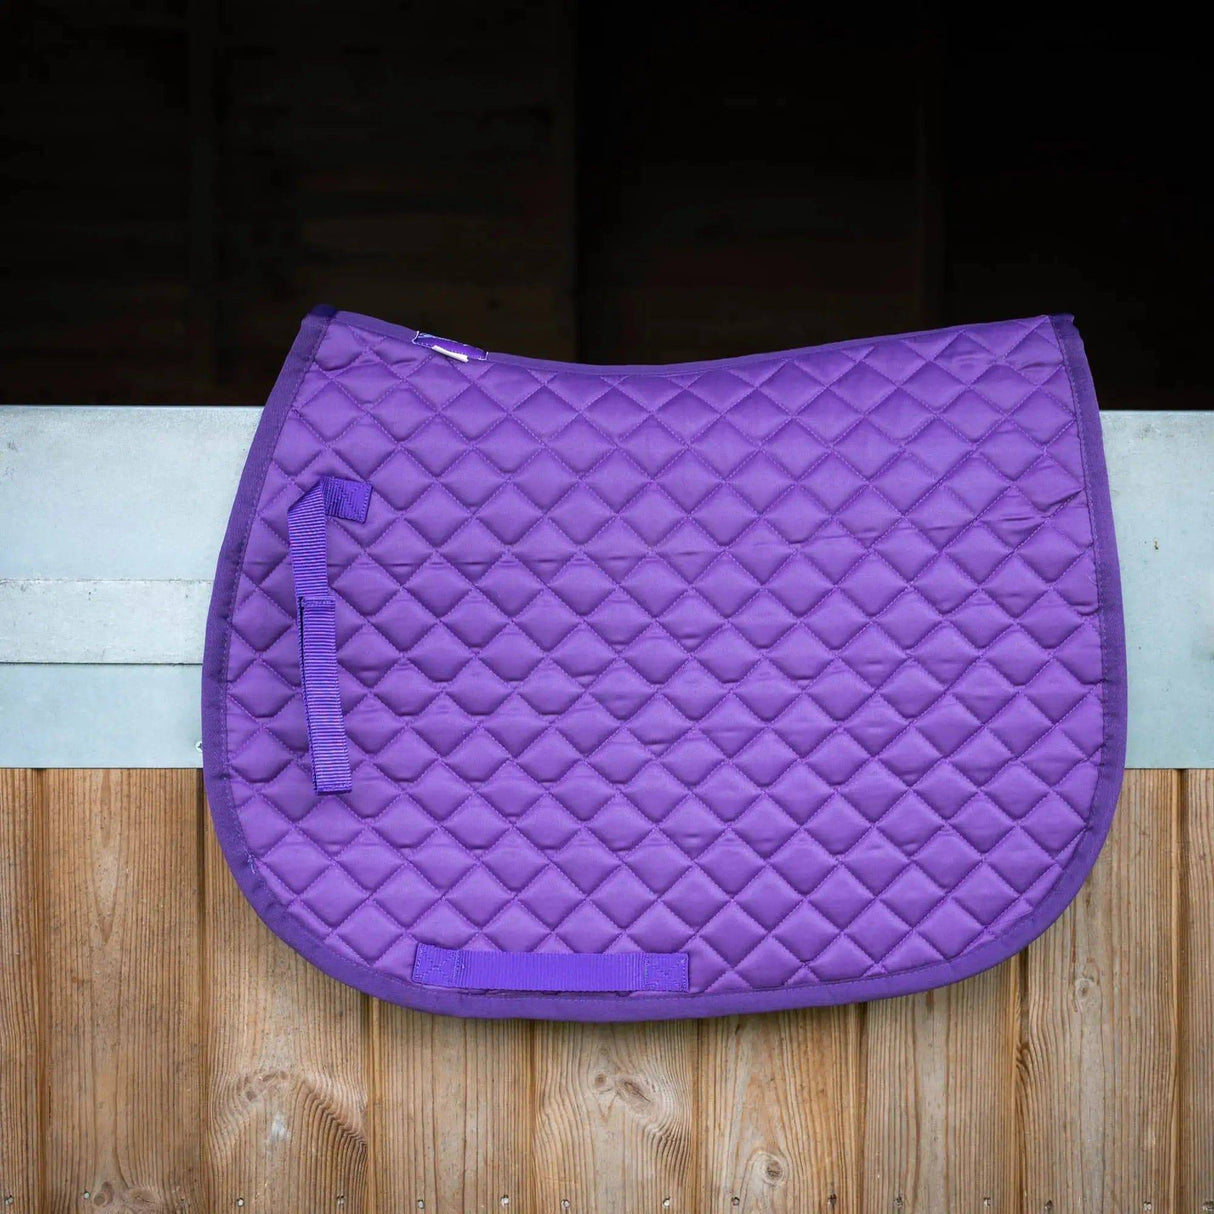 Gallop High Density Quilted Saddle Pad Purple Pony/Cob Gallop Equestrian Saddle Pads & Numnahs Barnstaple Equestrian Supplies